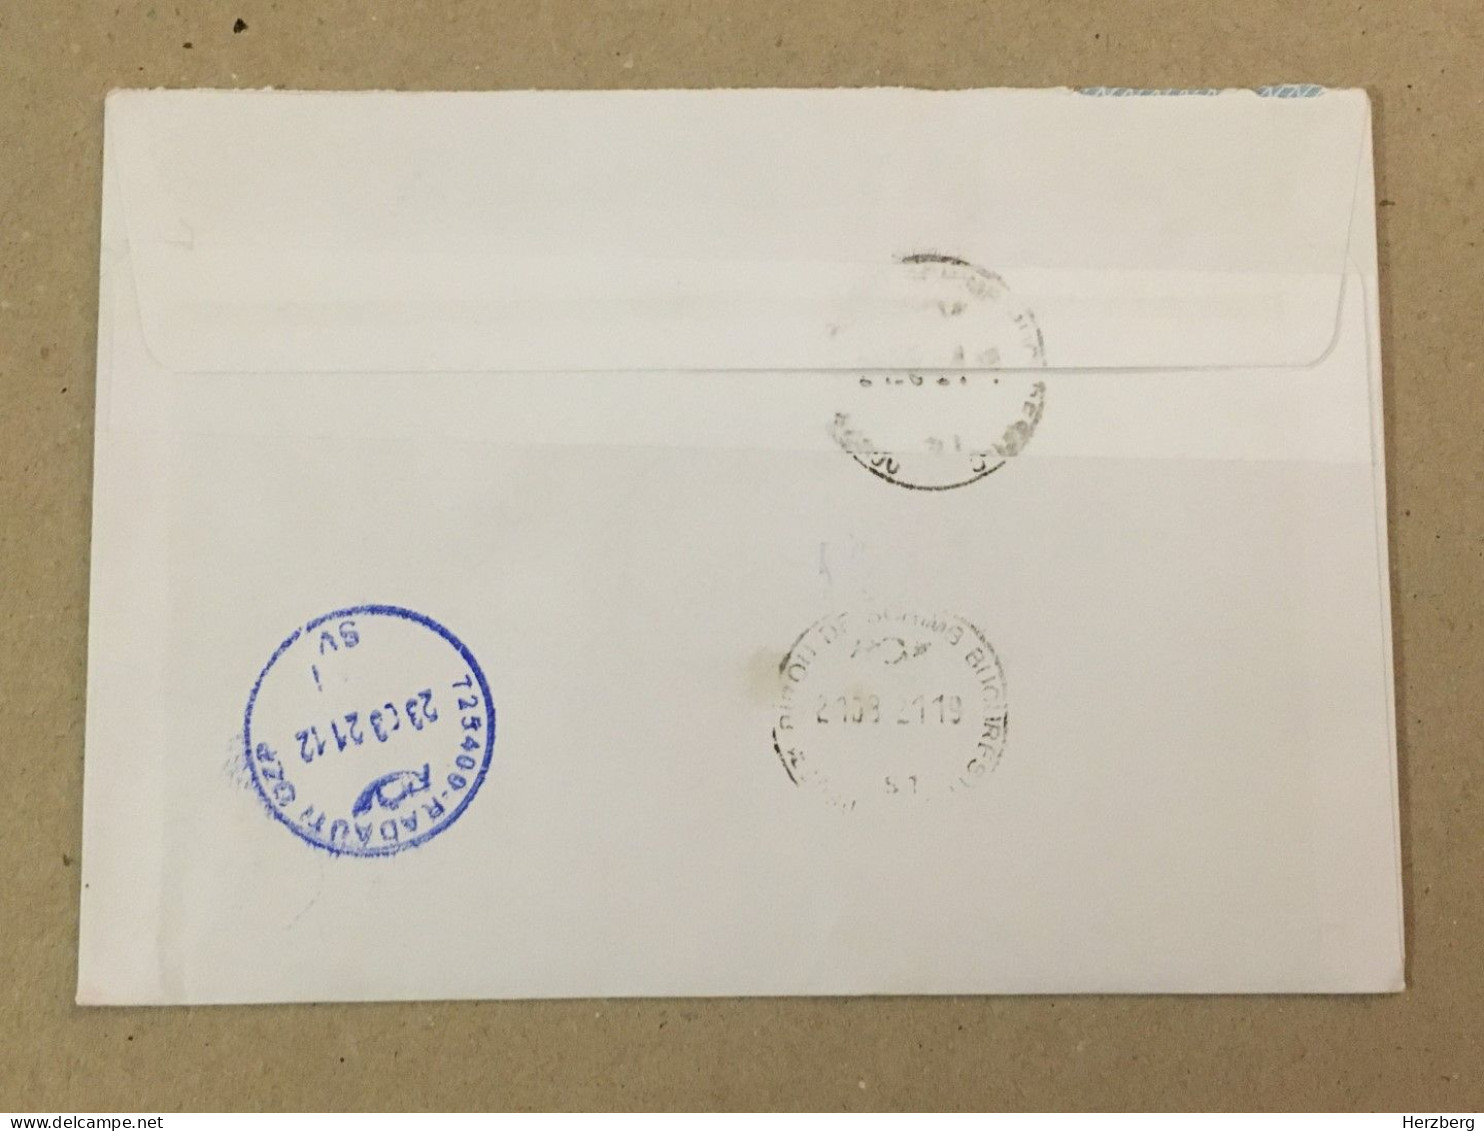 Slovakia Slovensko Used Letter Stamp Circulated Cover Registered Barcode Label Printed Sticker 2021 - Cartas & Documentos